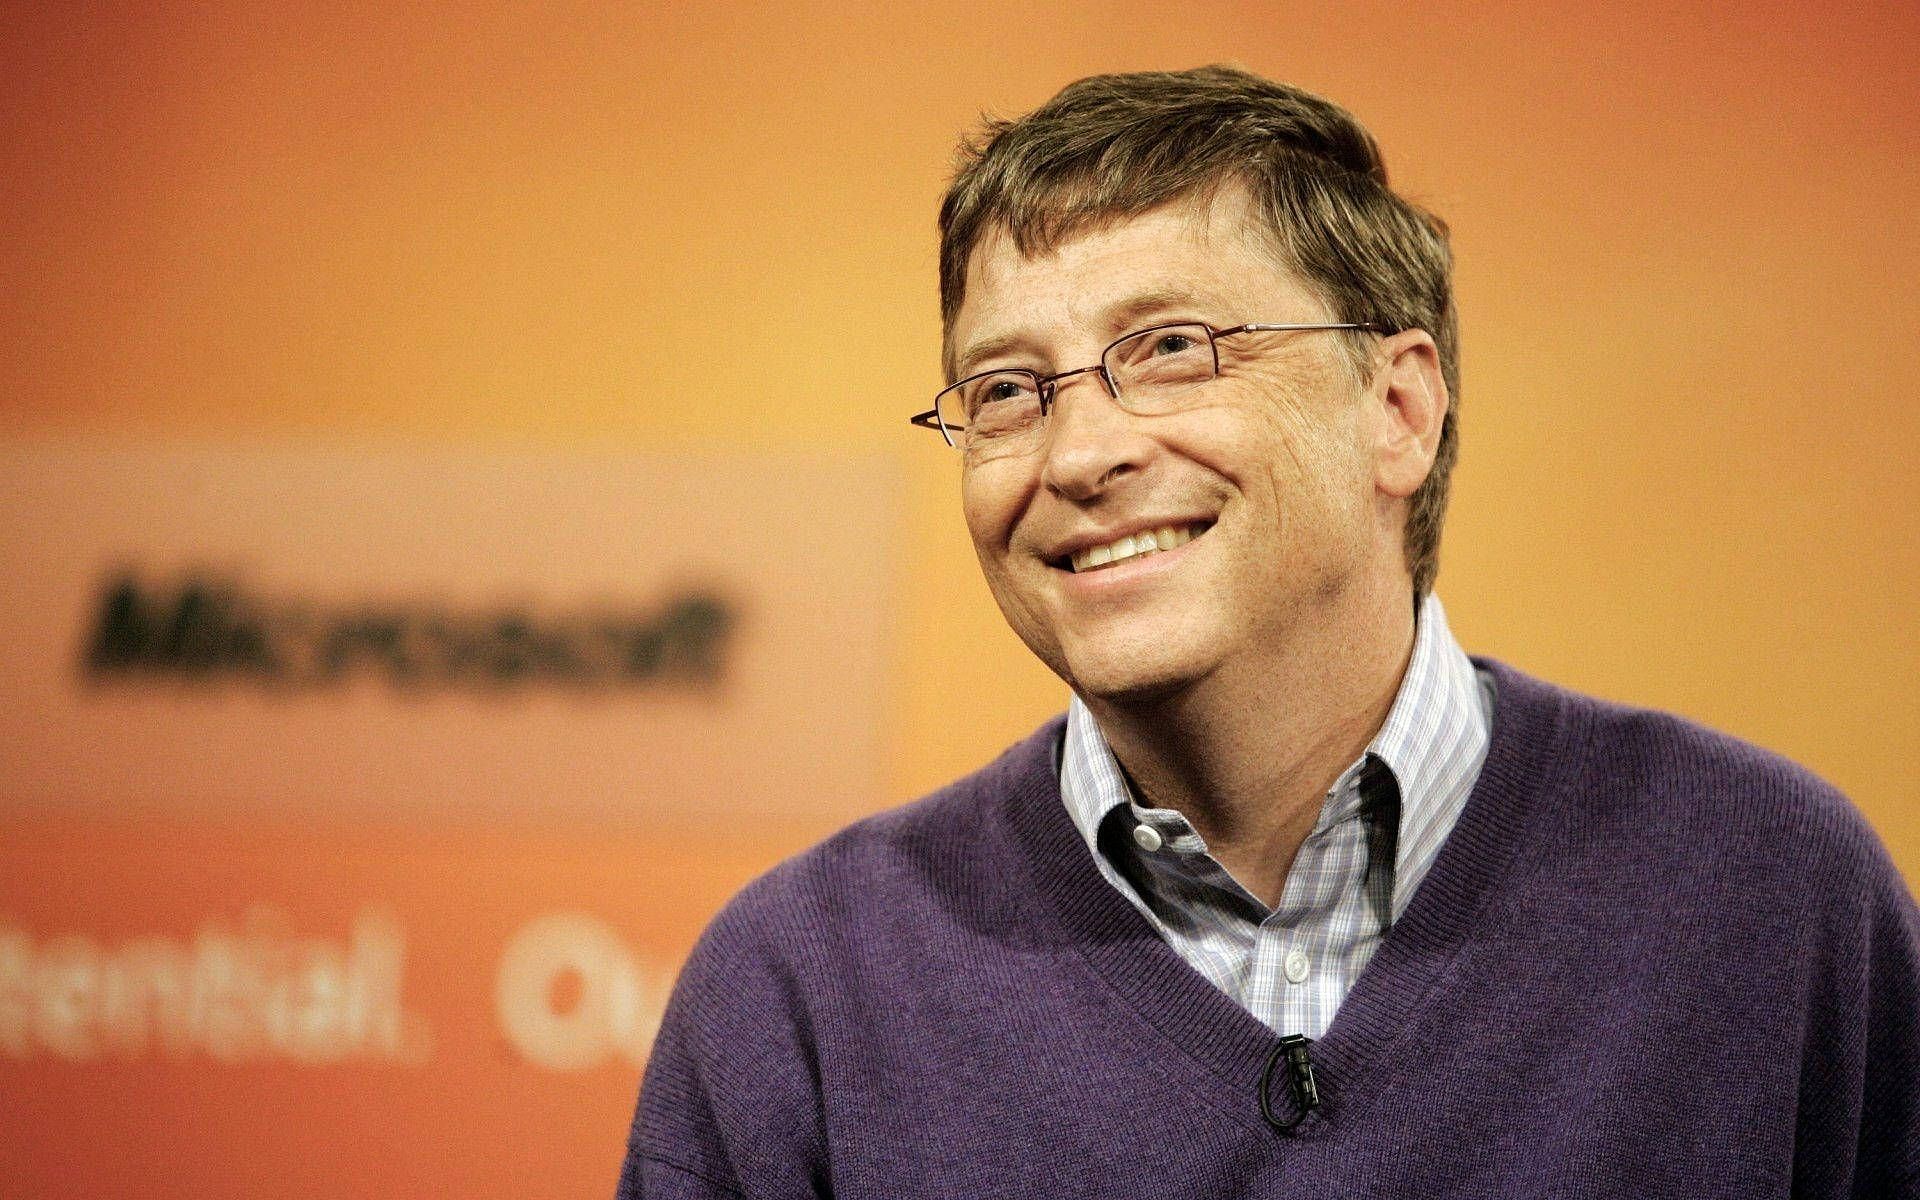 Co-founder of Microsoft and one of the most famous entrepreneurs, Bill Gates, also has joined Threads ( Image via Wallpapers.com)